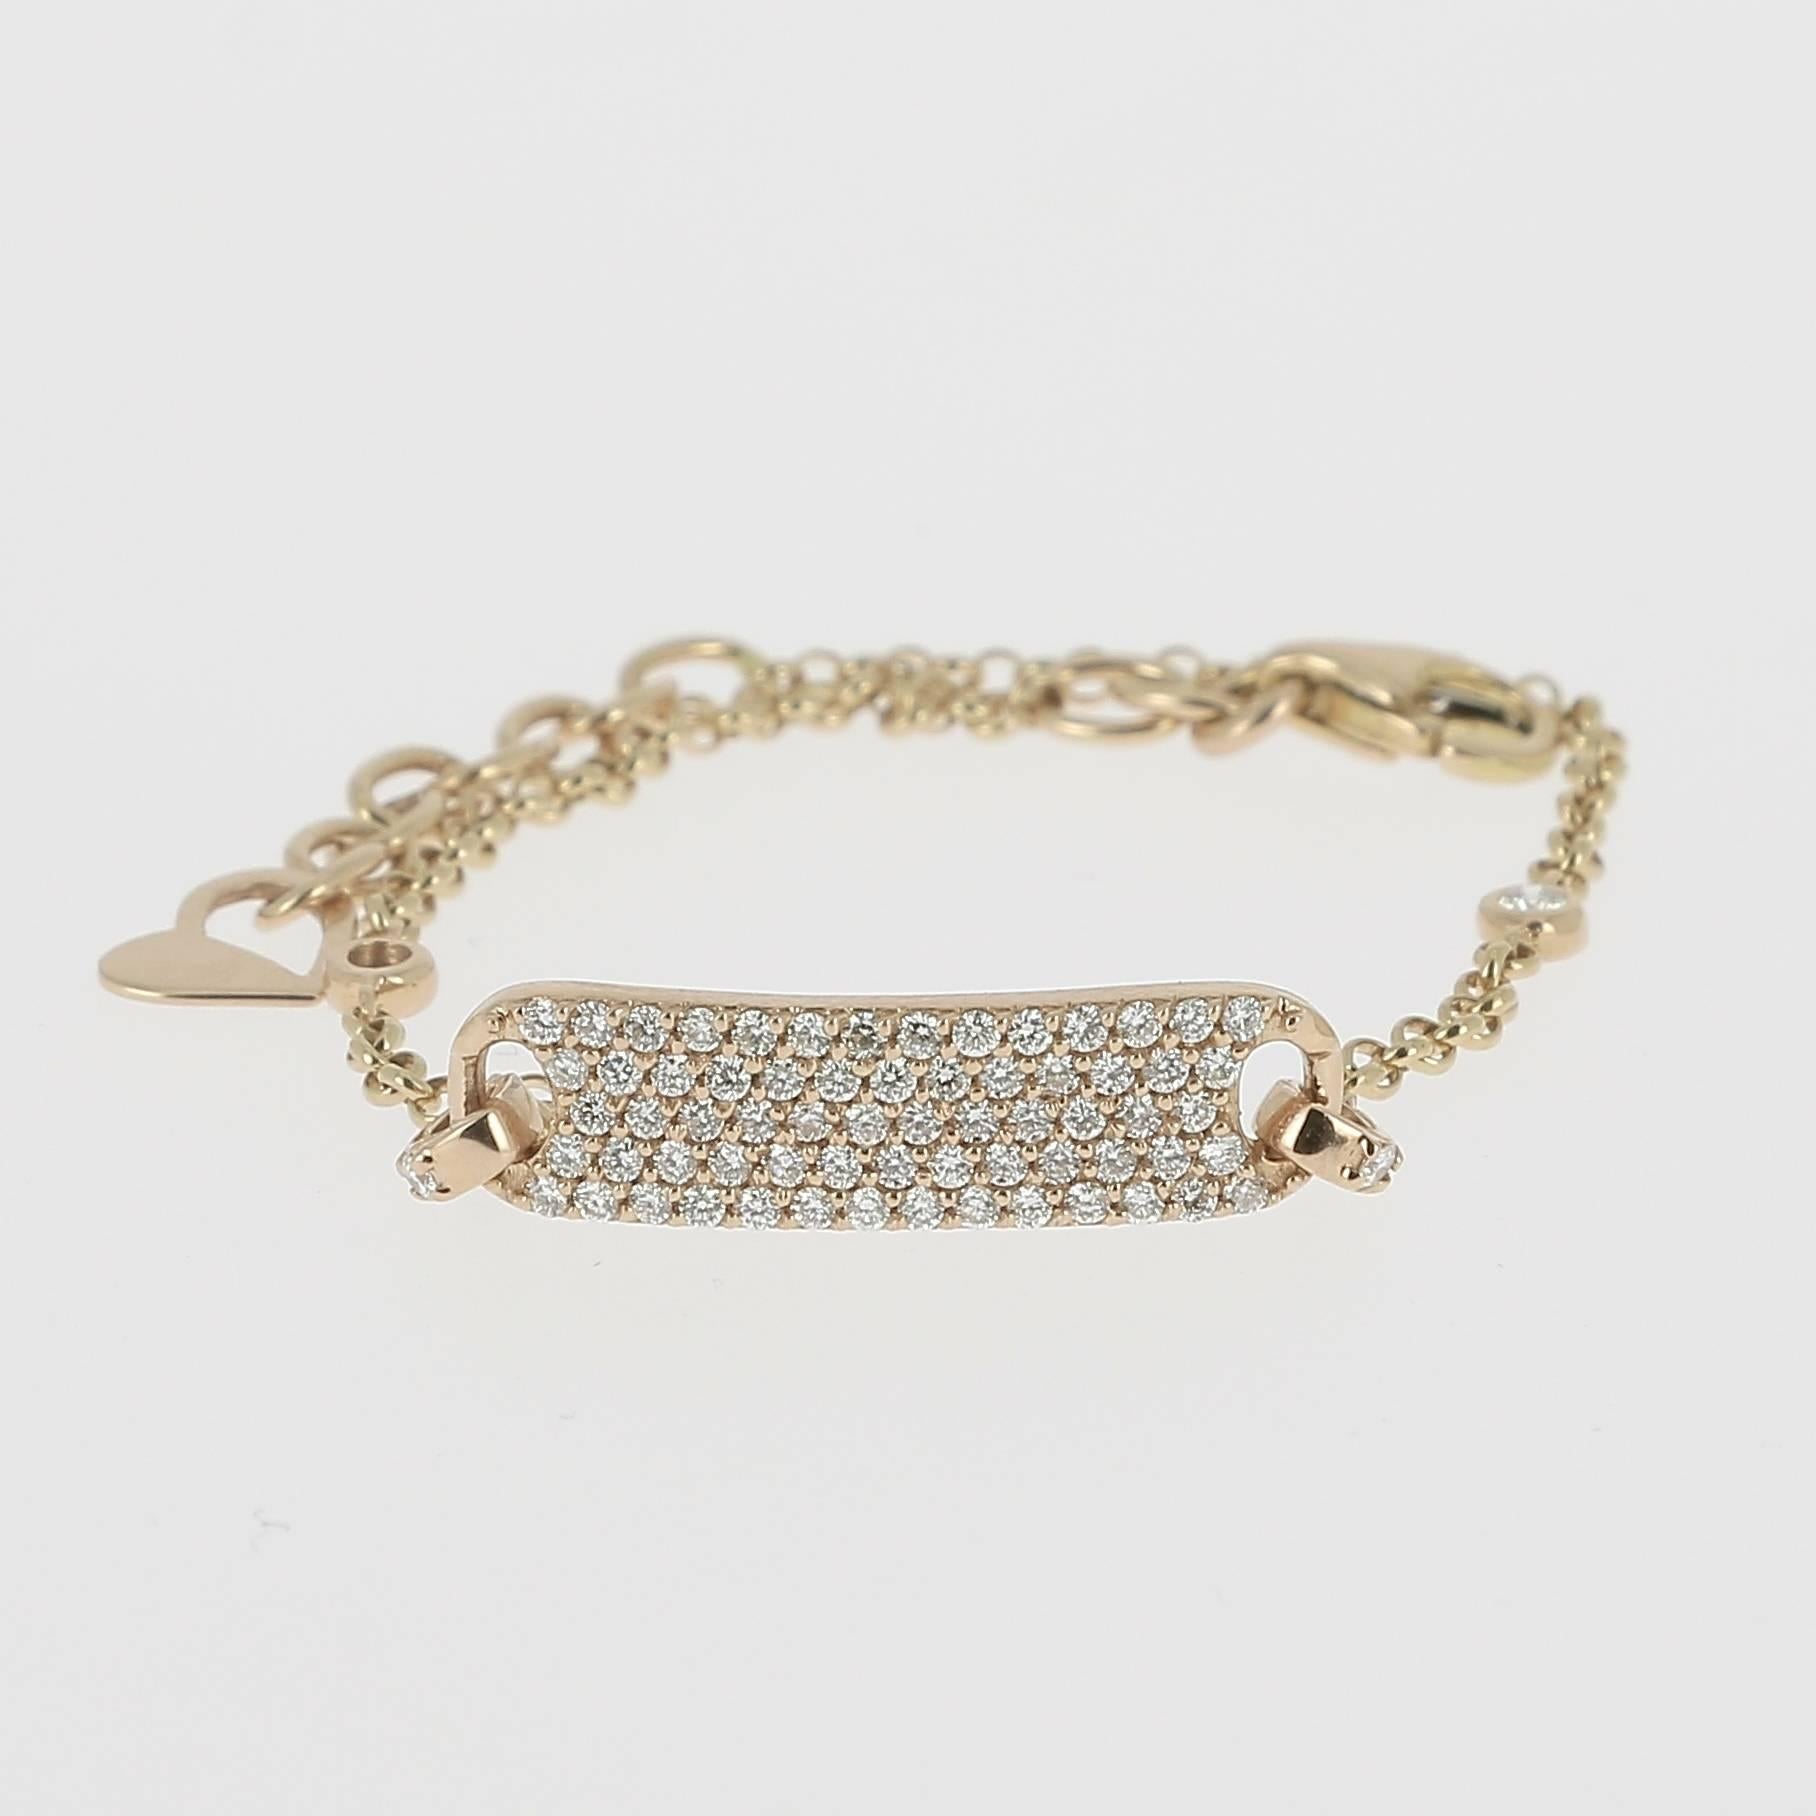 An amazing Tag Bracelet paved with Round Diamonds weighing 0.60 carats, hanging on a Chain Bracelet.
Clasp with several links to adjust the size on the wrist.
The Diamonds are GVS qualities.
The Modern Bracelet weight 4.3 Grams (g).
The Bracelet is